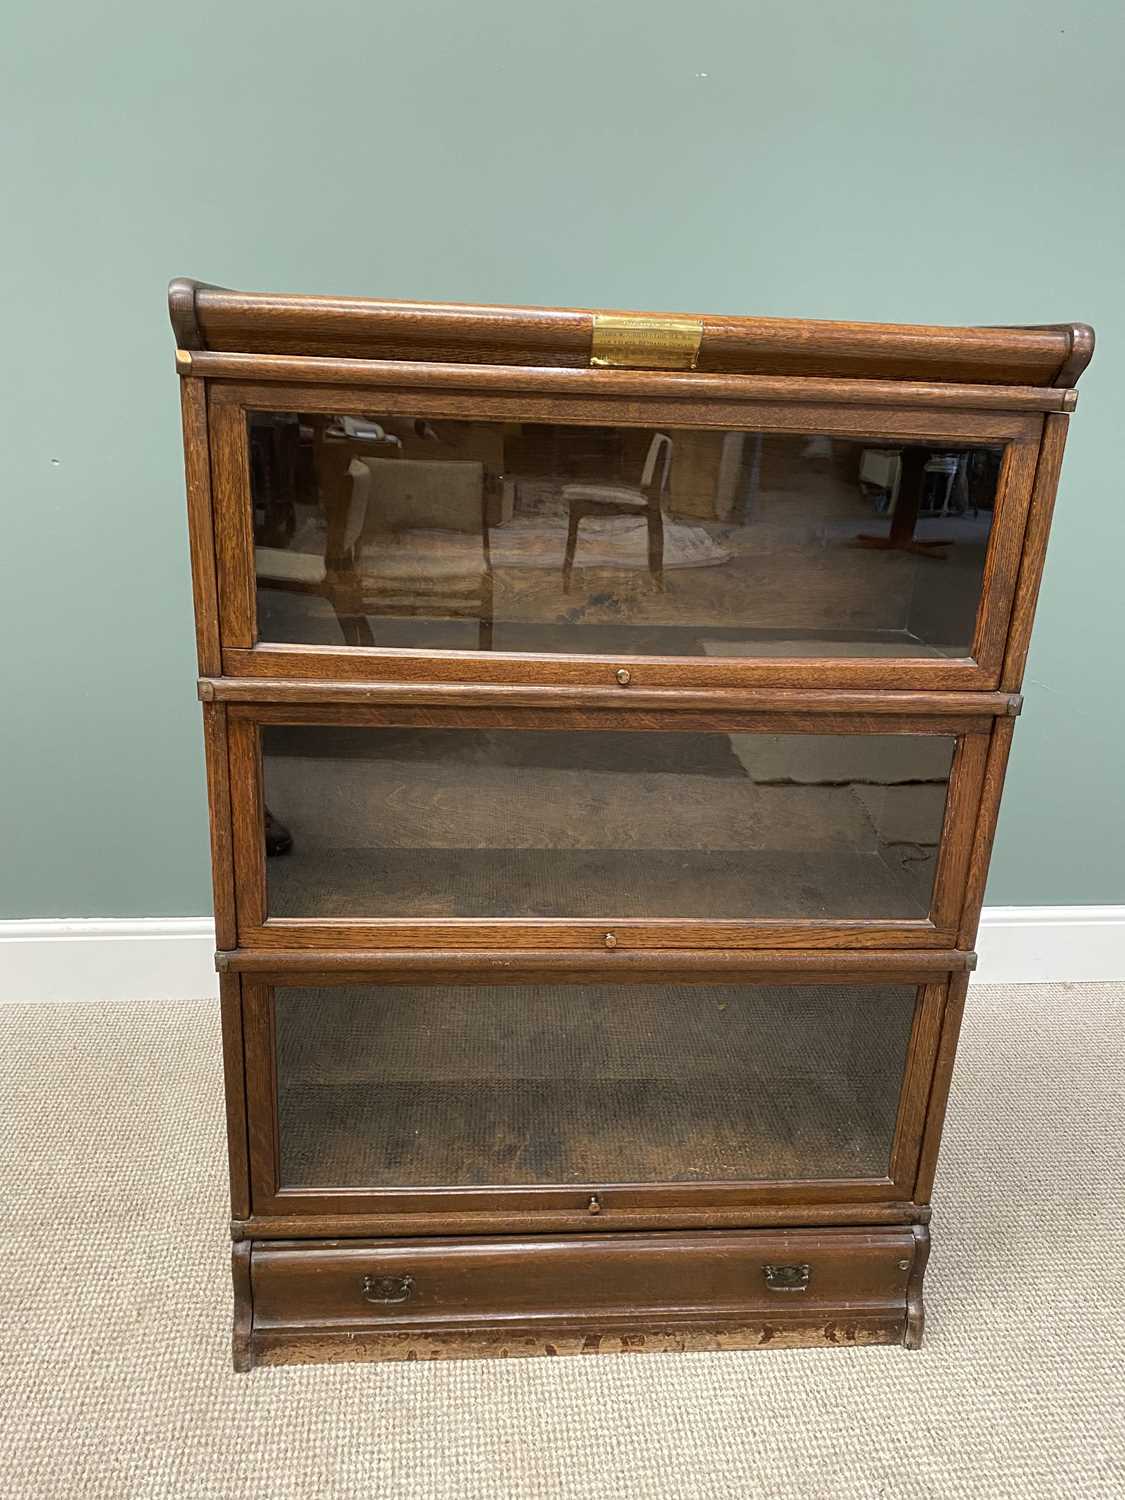 OAK -PROBABLY GLOBE WERNICKE-THREE-SECTION STACKING BOOKCASE, with top cover and single drawer base,